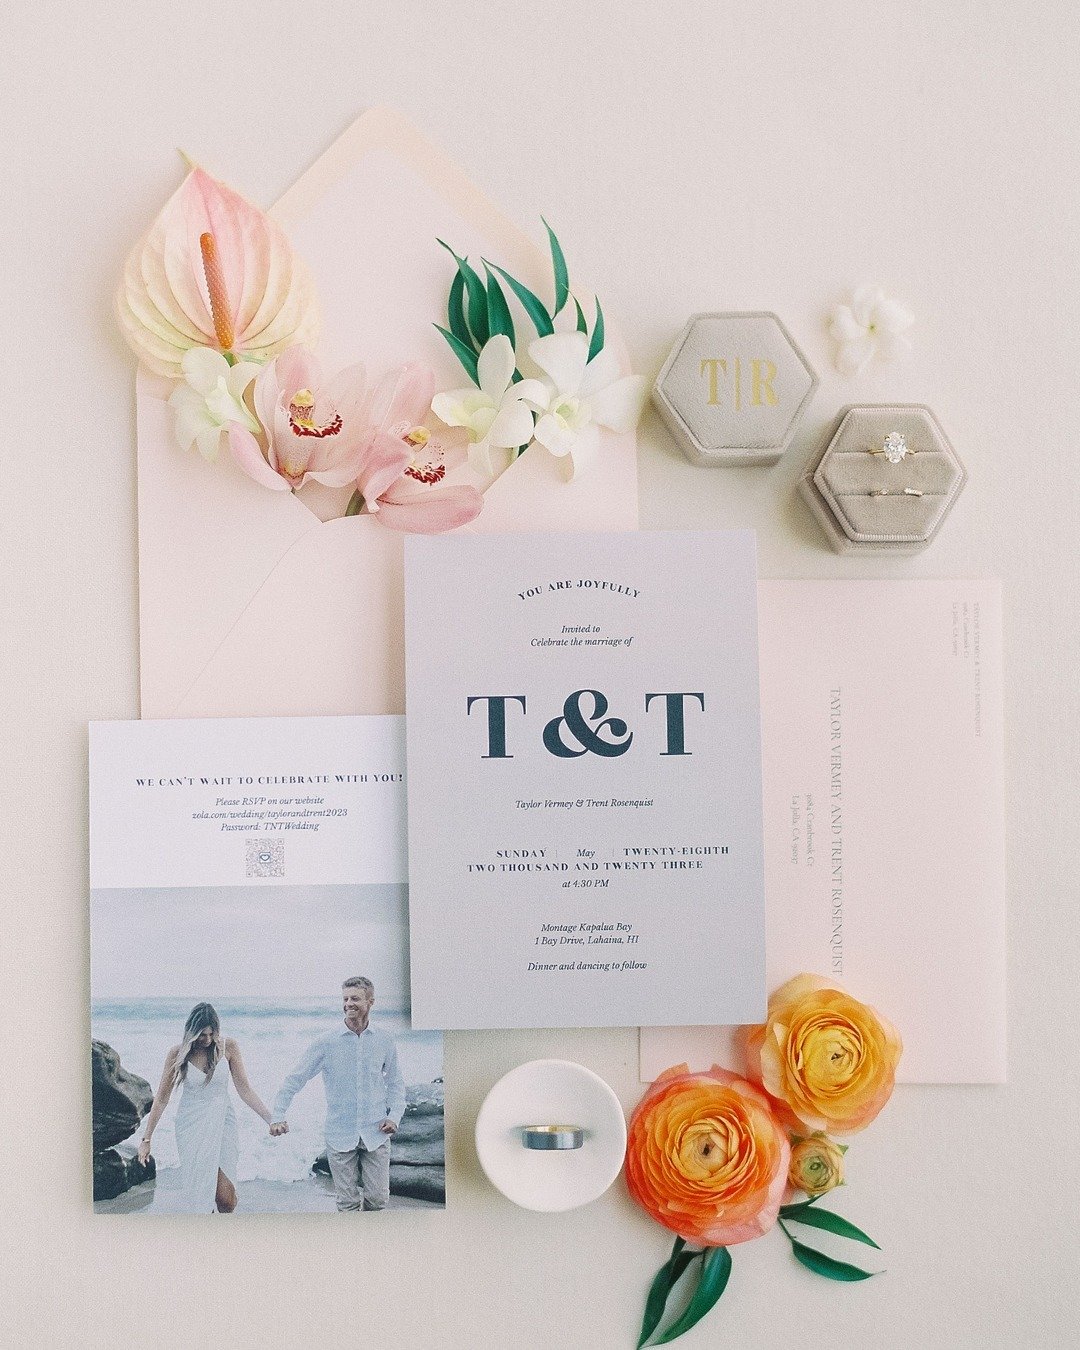 Absolutely in love with how every detail comes together&mdash;from the floral arrangements and invitations to the wedding bands and heartfelt vows. It's all about creating a perfect harmony. 💍🌸✉️ ⁠
⁠
Venue | @montagekapalua⁠
Photography @dmitriands